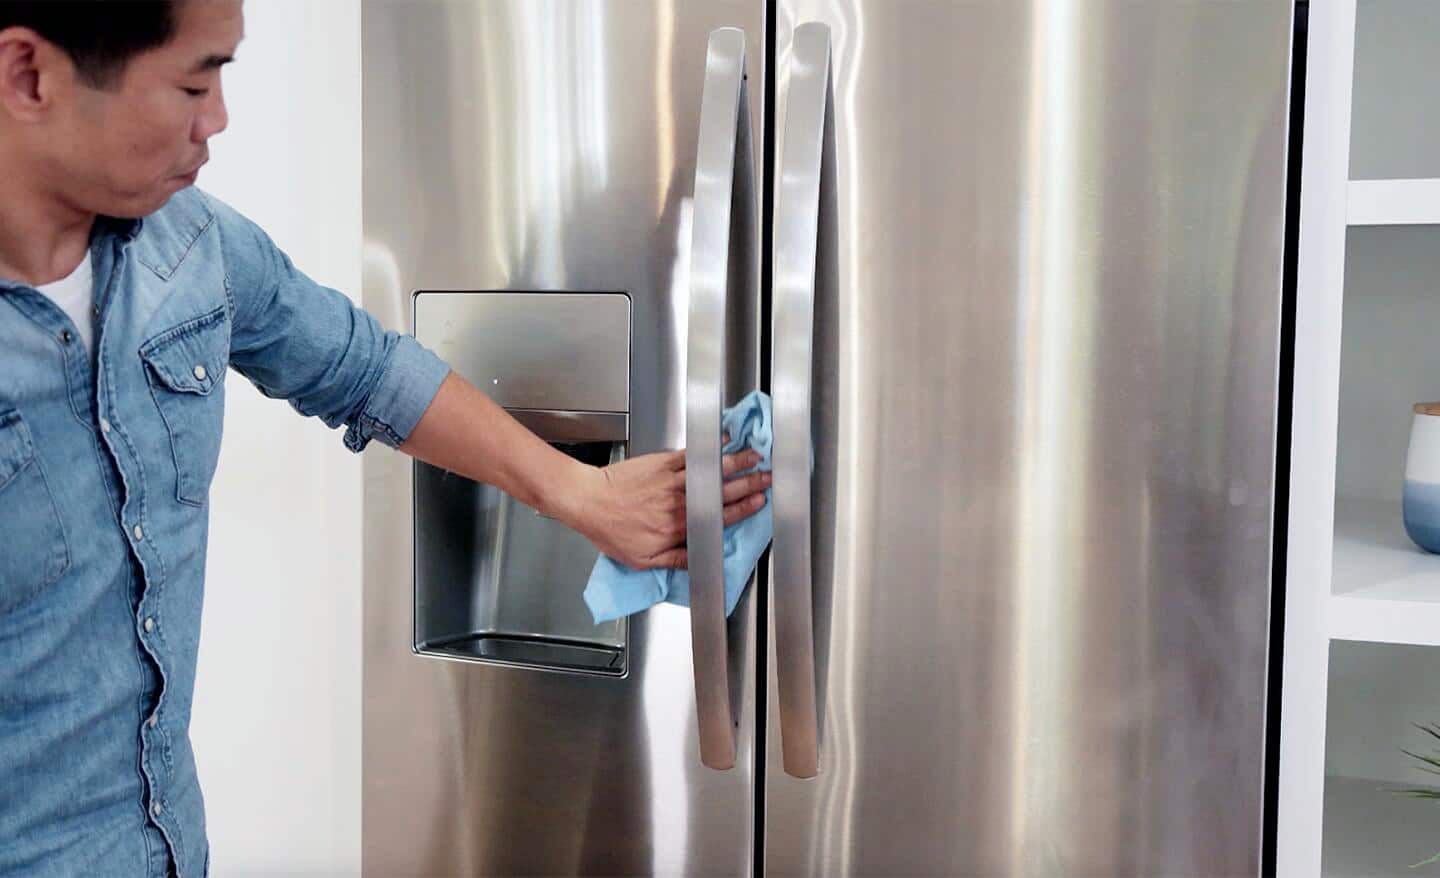 A person uses a cleaning cloth to wipe down the exterior side of a refrigerator door.